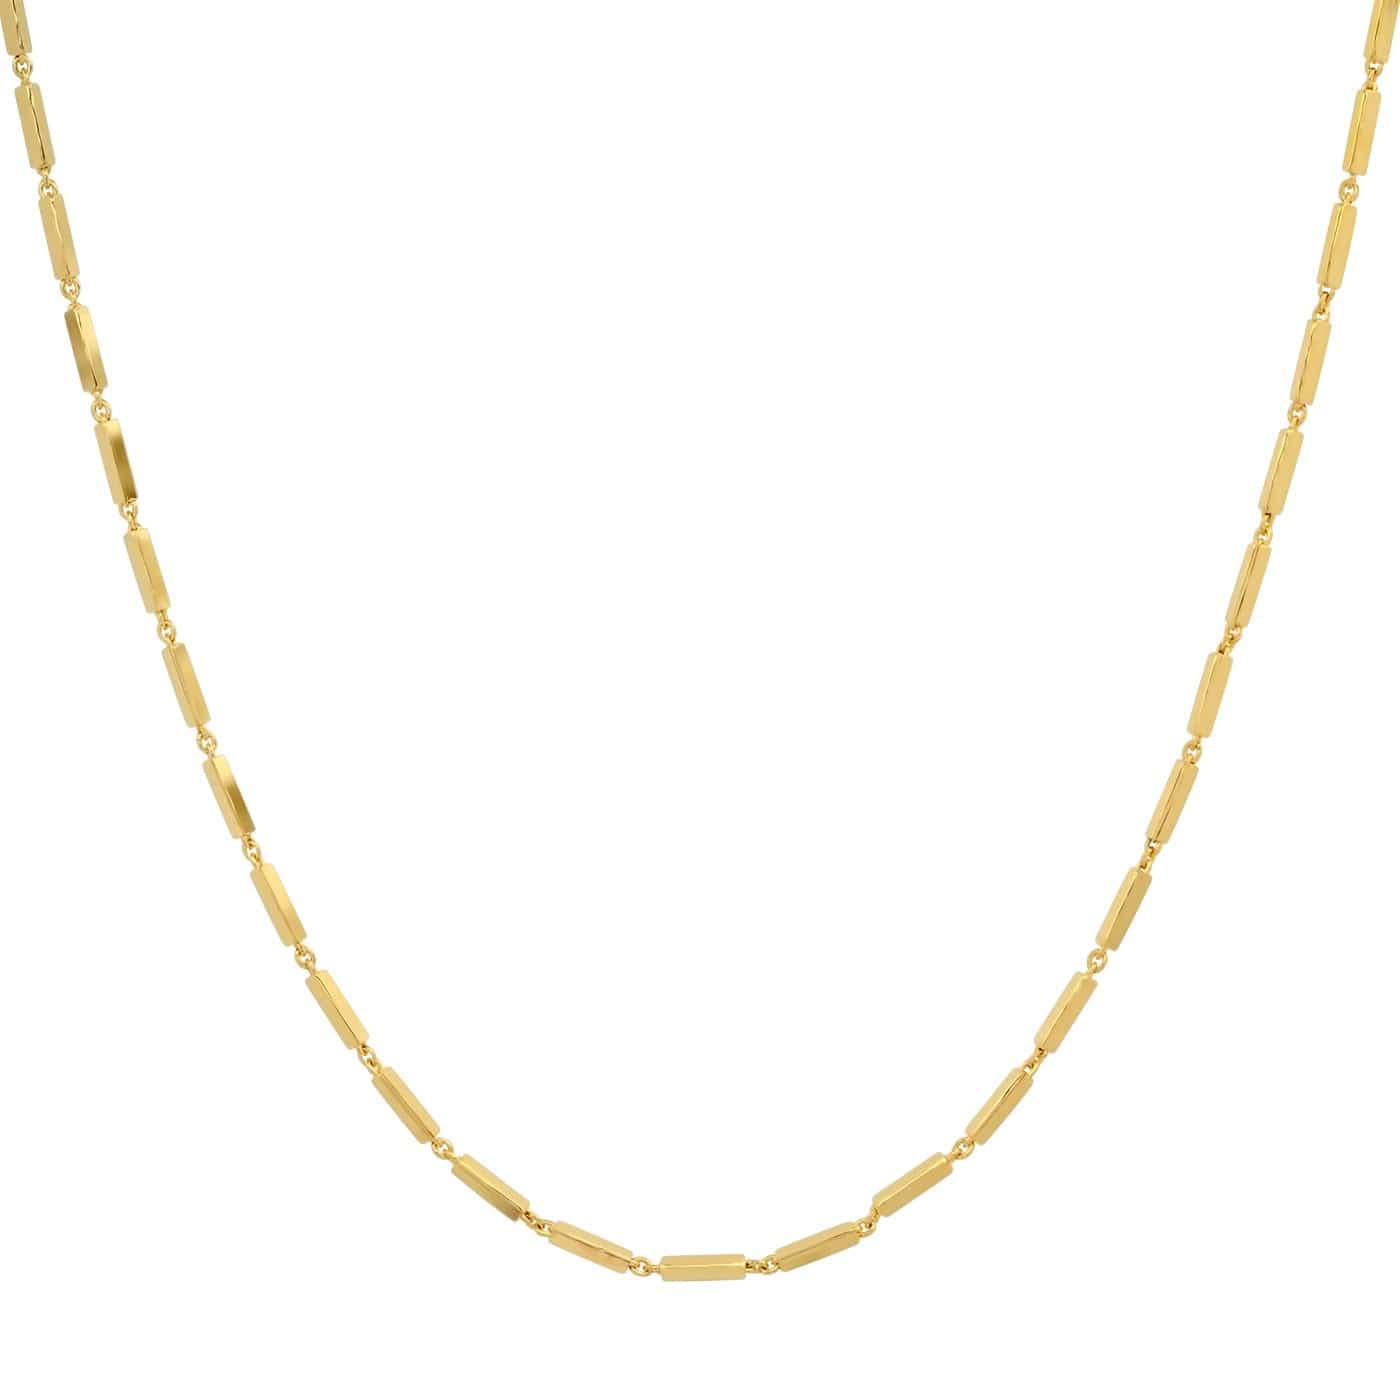 TAI JEWELRY Necklace Gold Vermeil Bar Chain